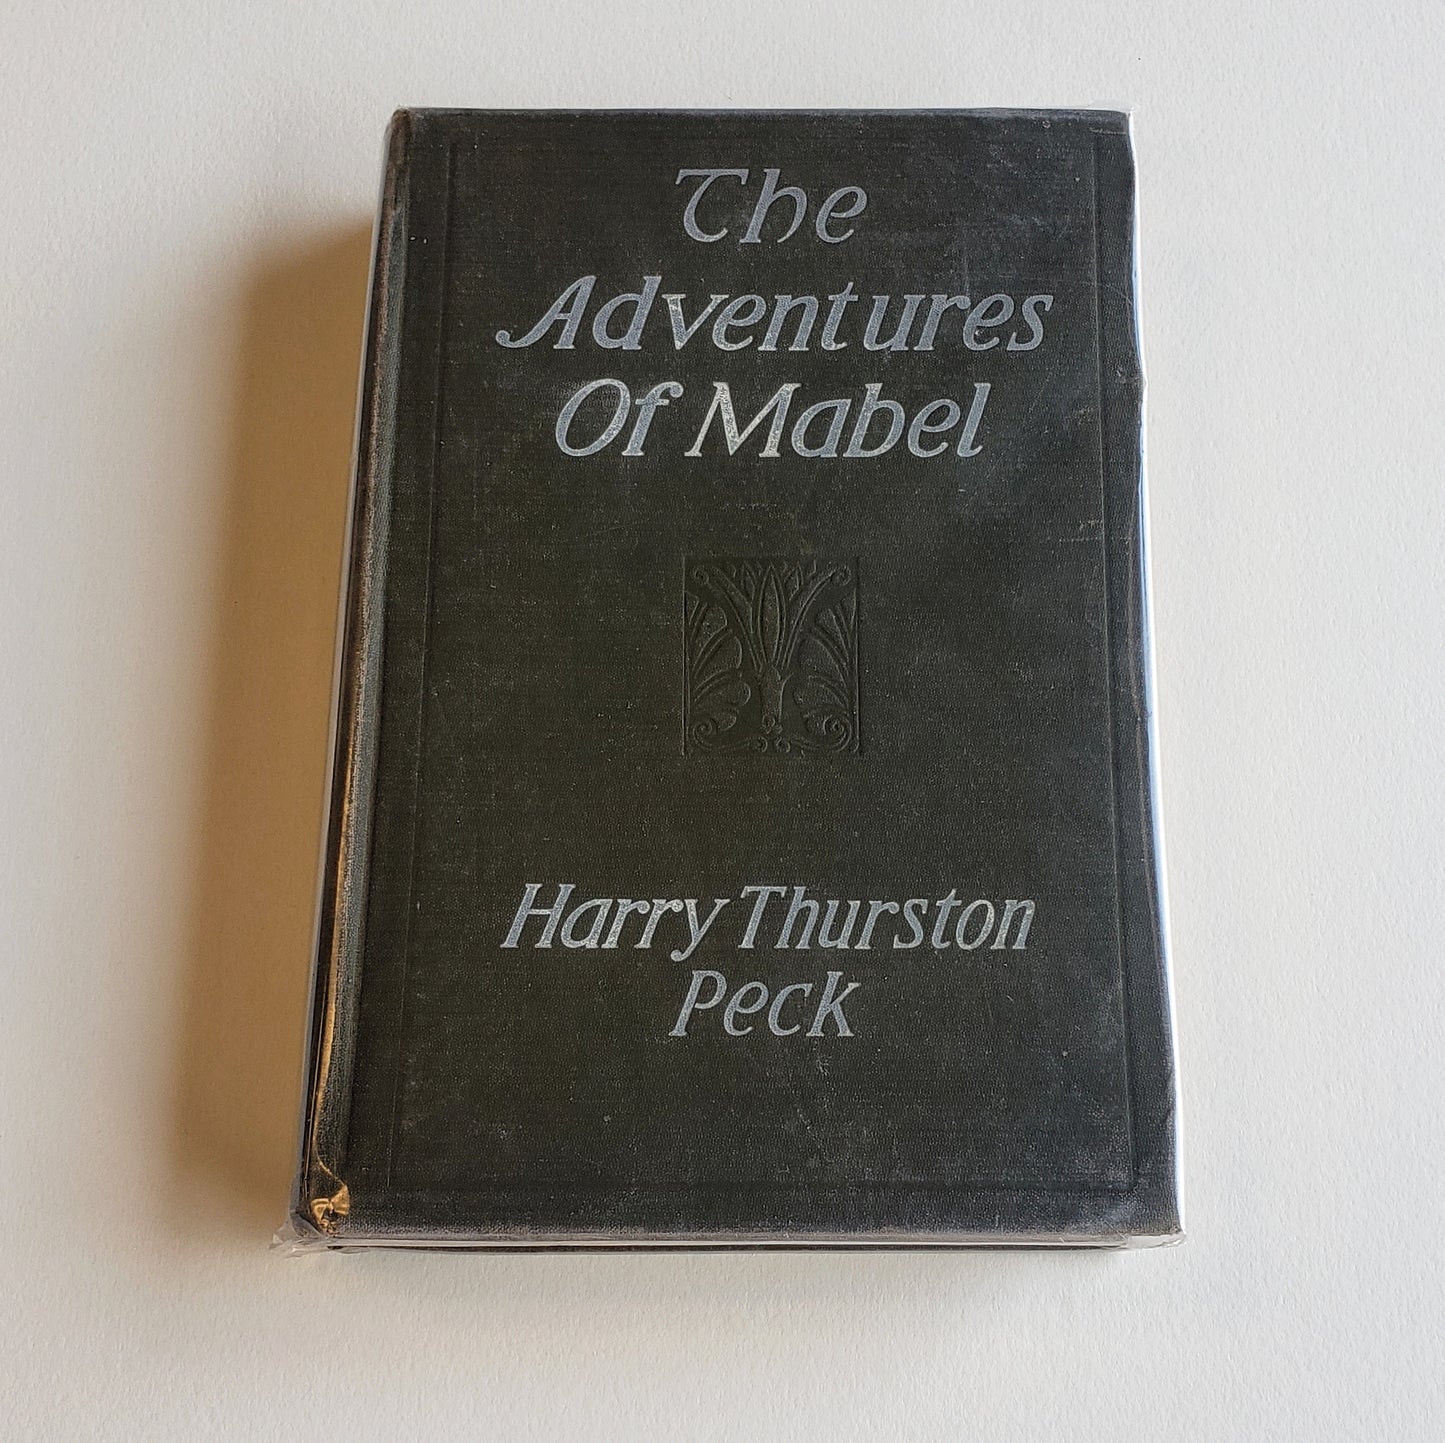 Vintage Book- The Adventures of Mabel by Harry Thurston Peck (Children's)